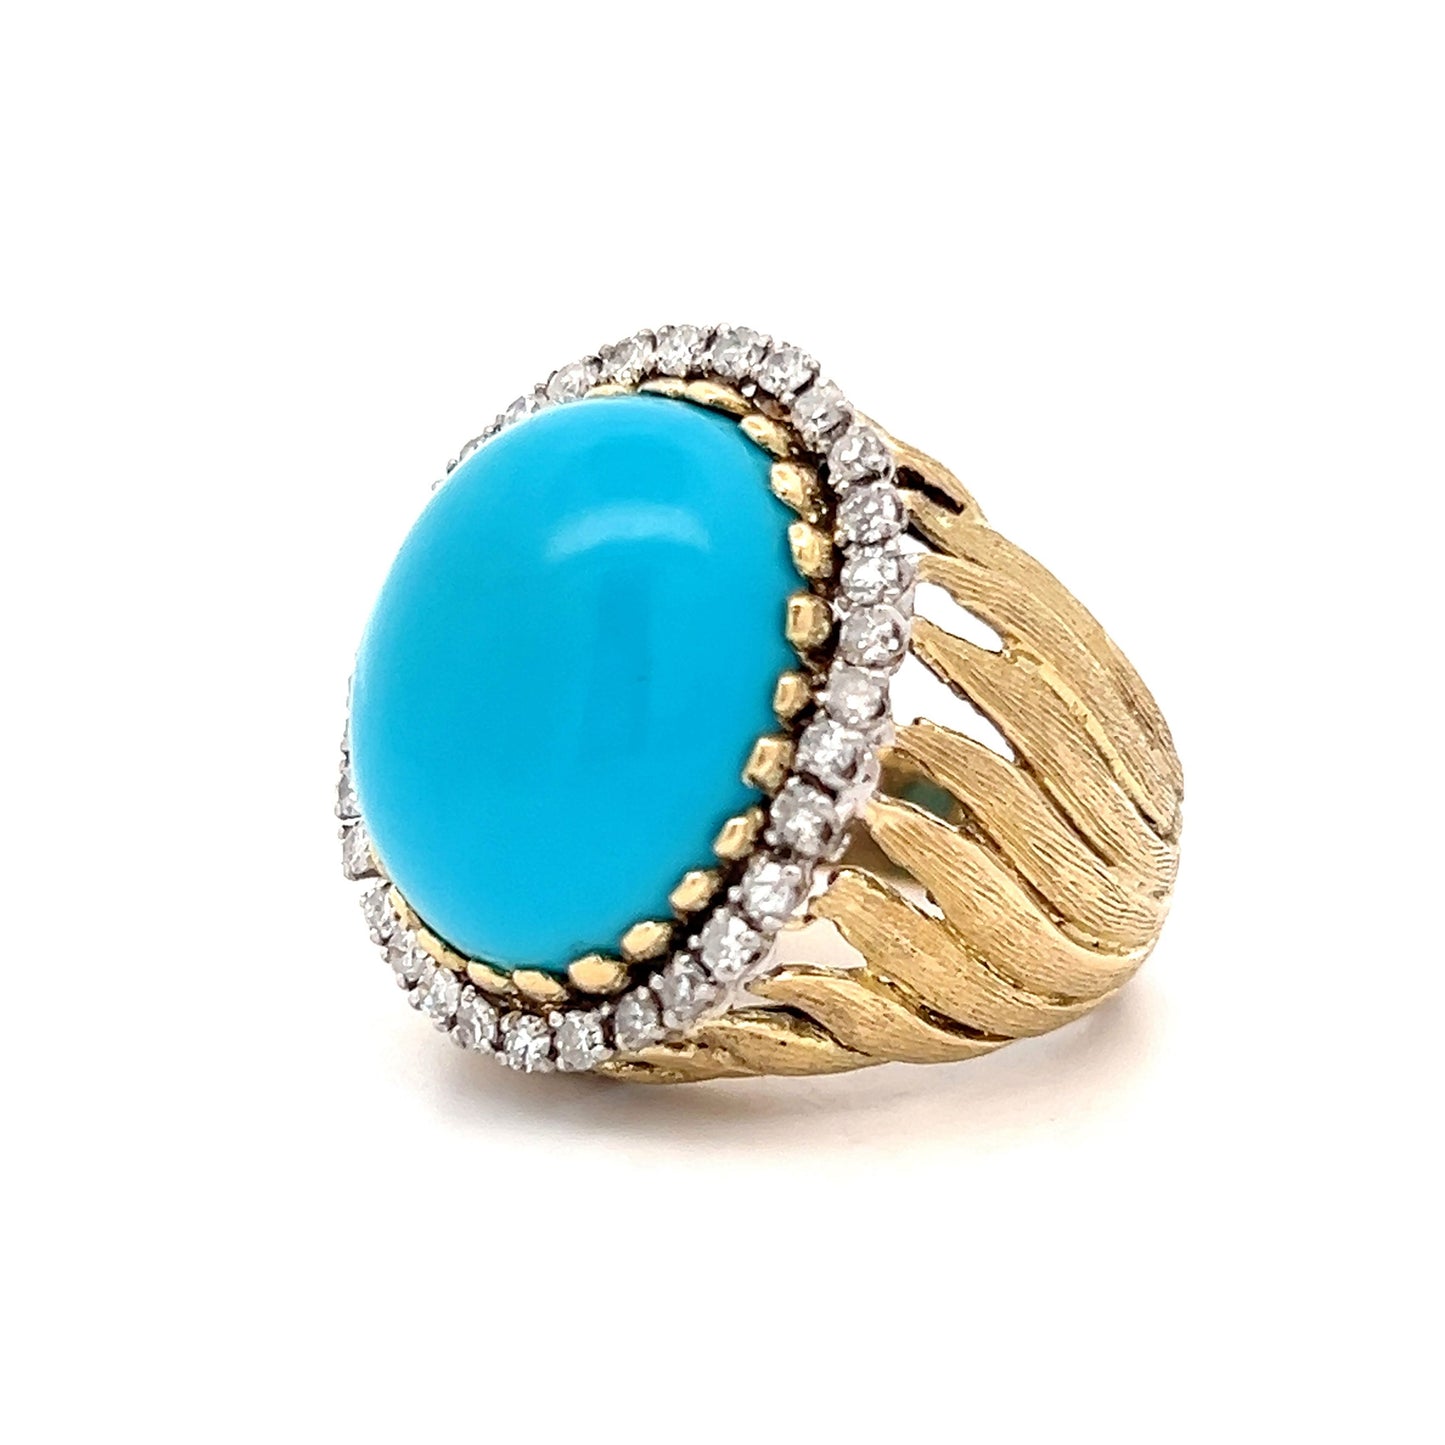 16.87 Vintage Turquoise & Diamond Cocktail Ring in Yellow Gold